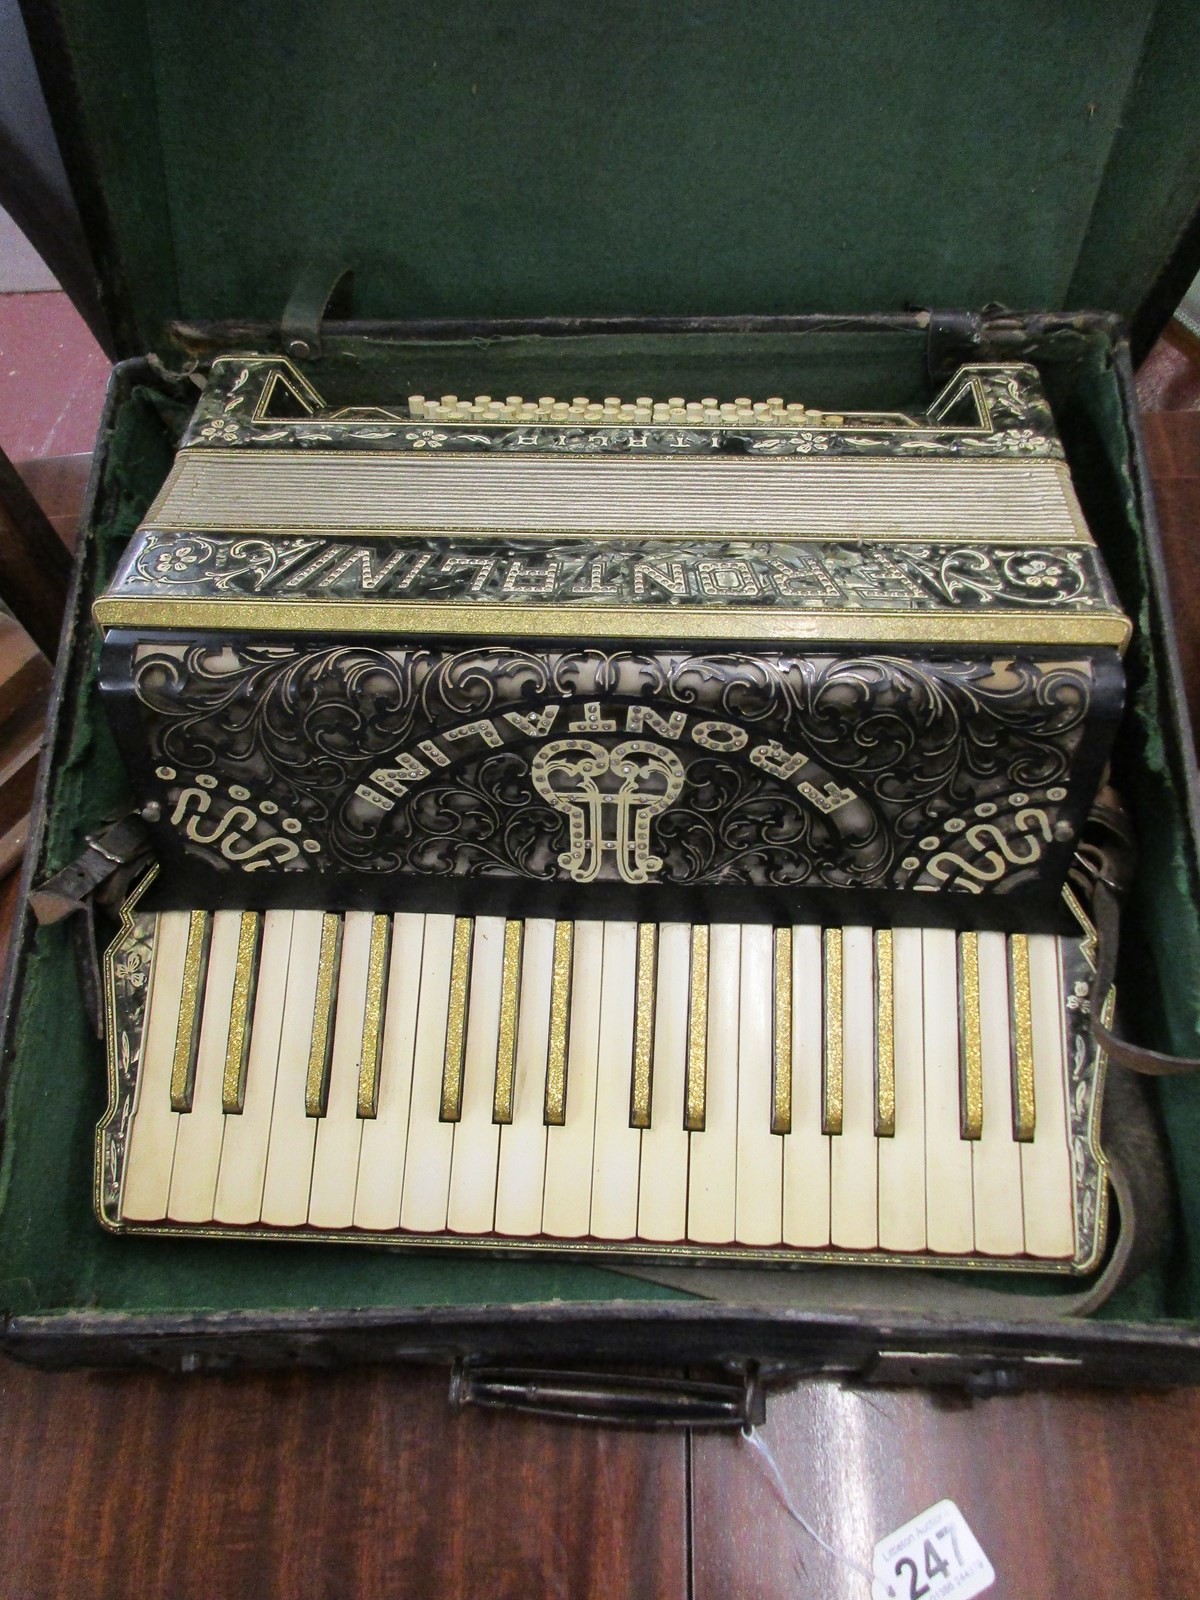 Accordian by Frontalini in case - Estimate £100 - £150